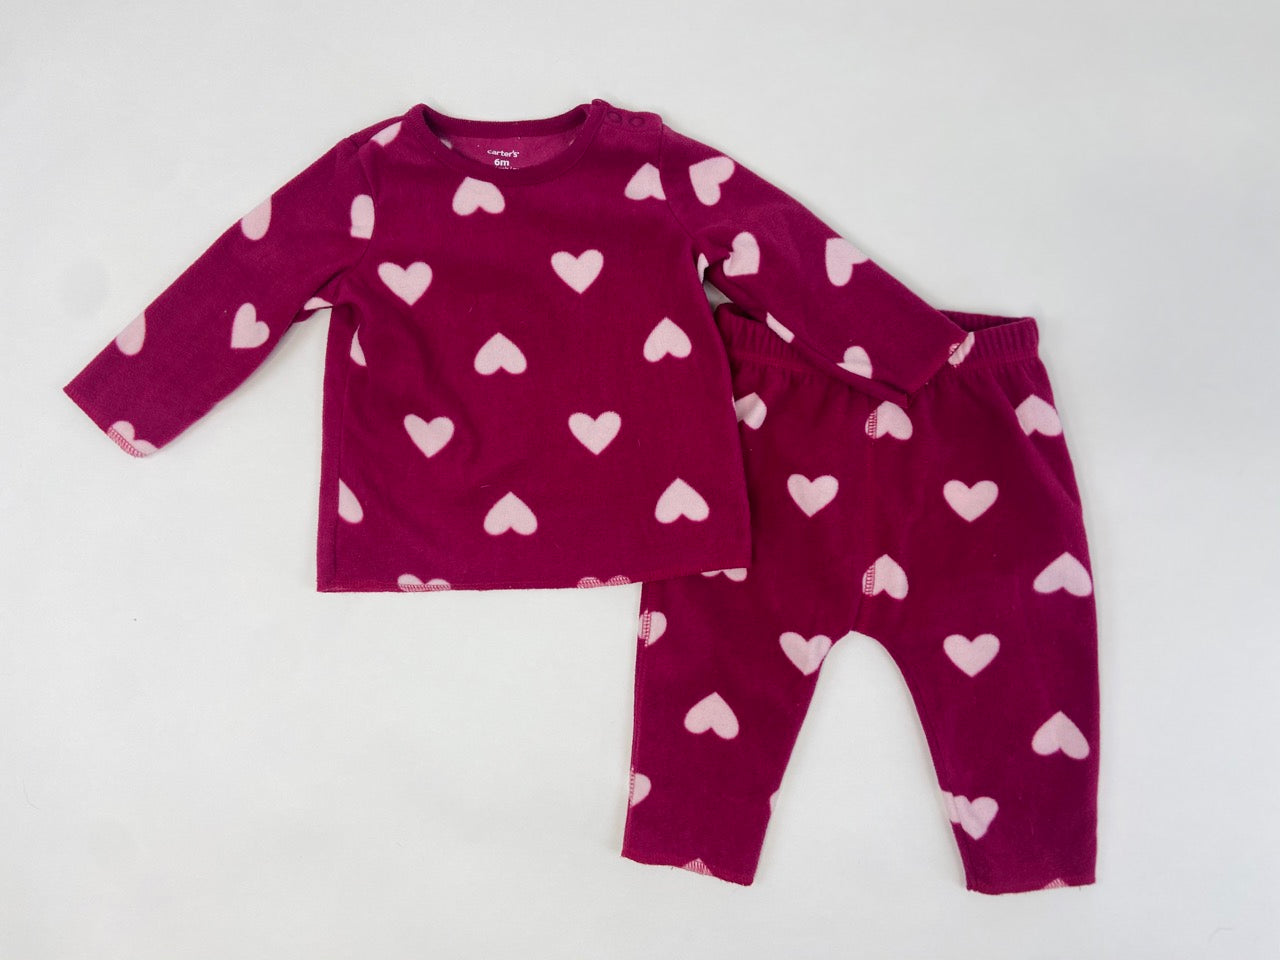 Fleece Hearts Outfit - 6 Months